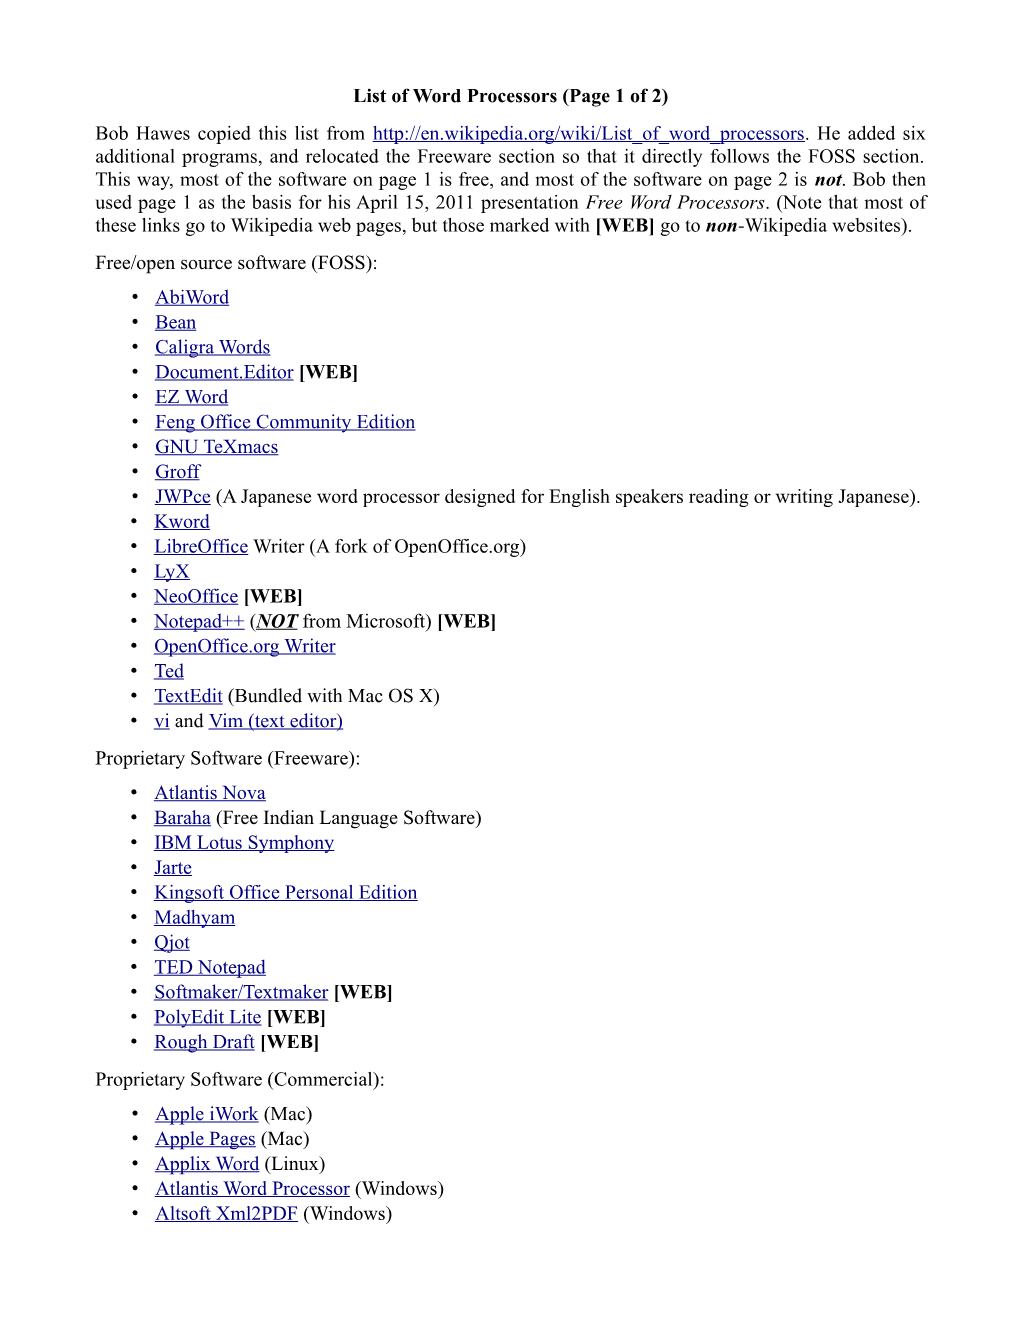 List of Word Processors (Page 1 of 2) Bob Hawes Copied This List From